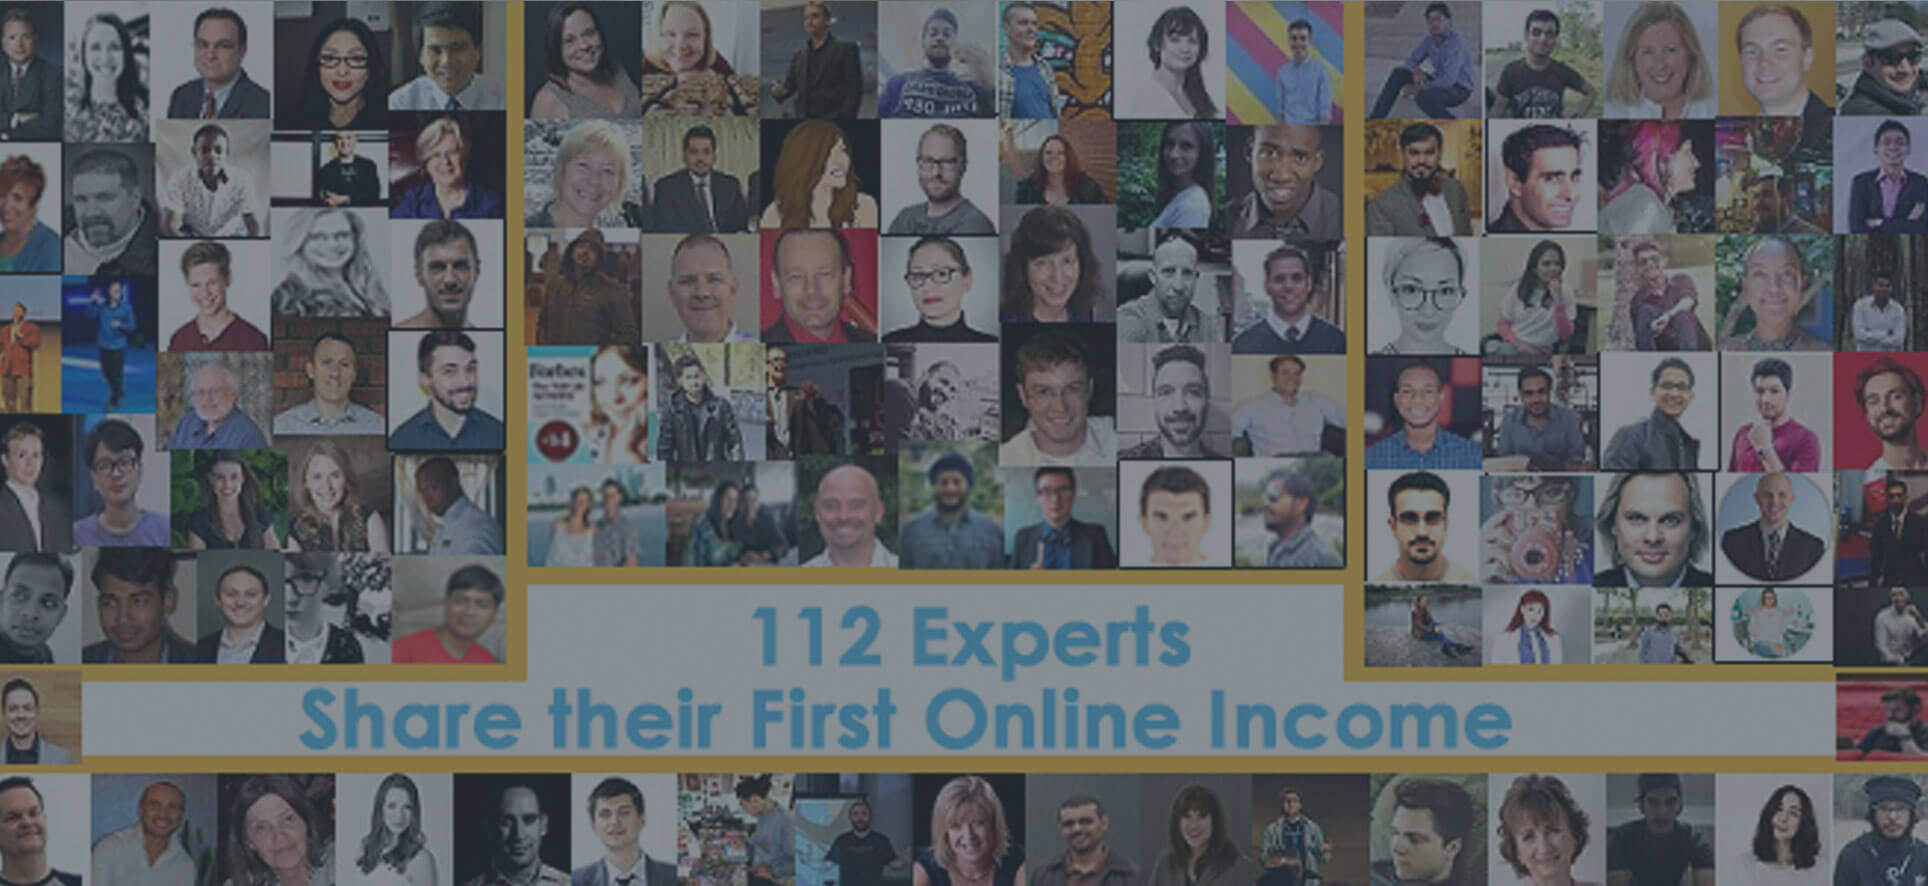 Roundup - 112 Experts Share their First Online Income